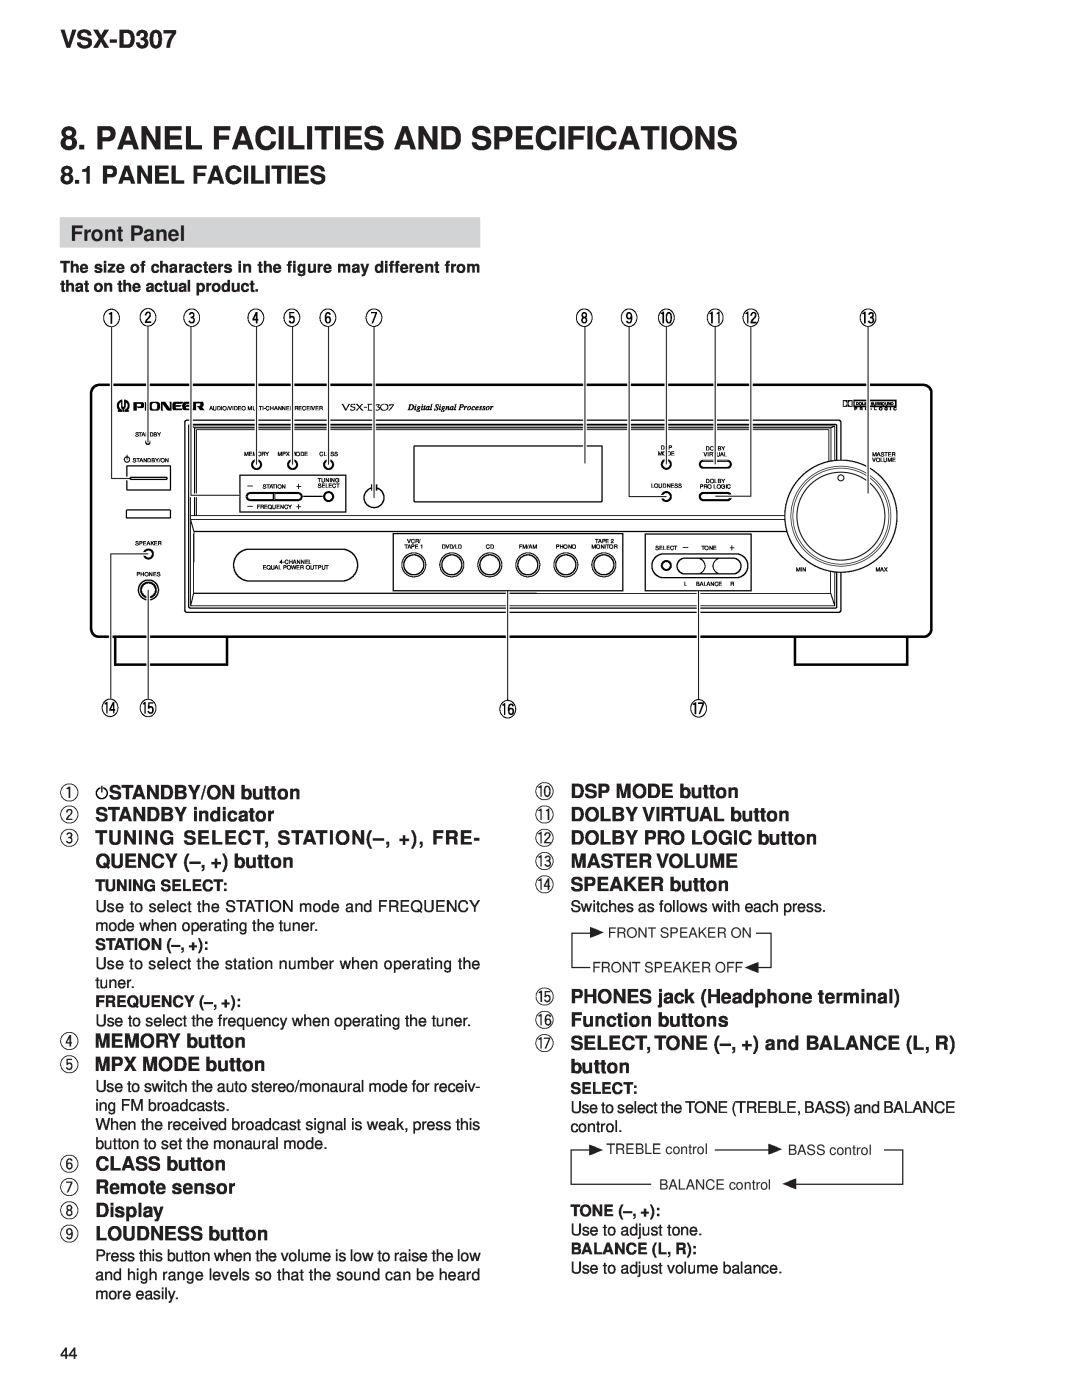 Dolby Laboratories STAV-3770, 31-3043 service manual Panel Facilities And Specifications, Front Panel, VSX-D307 